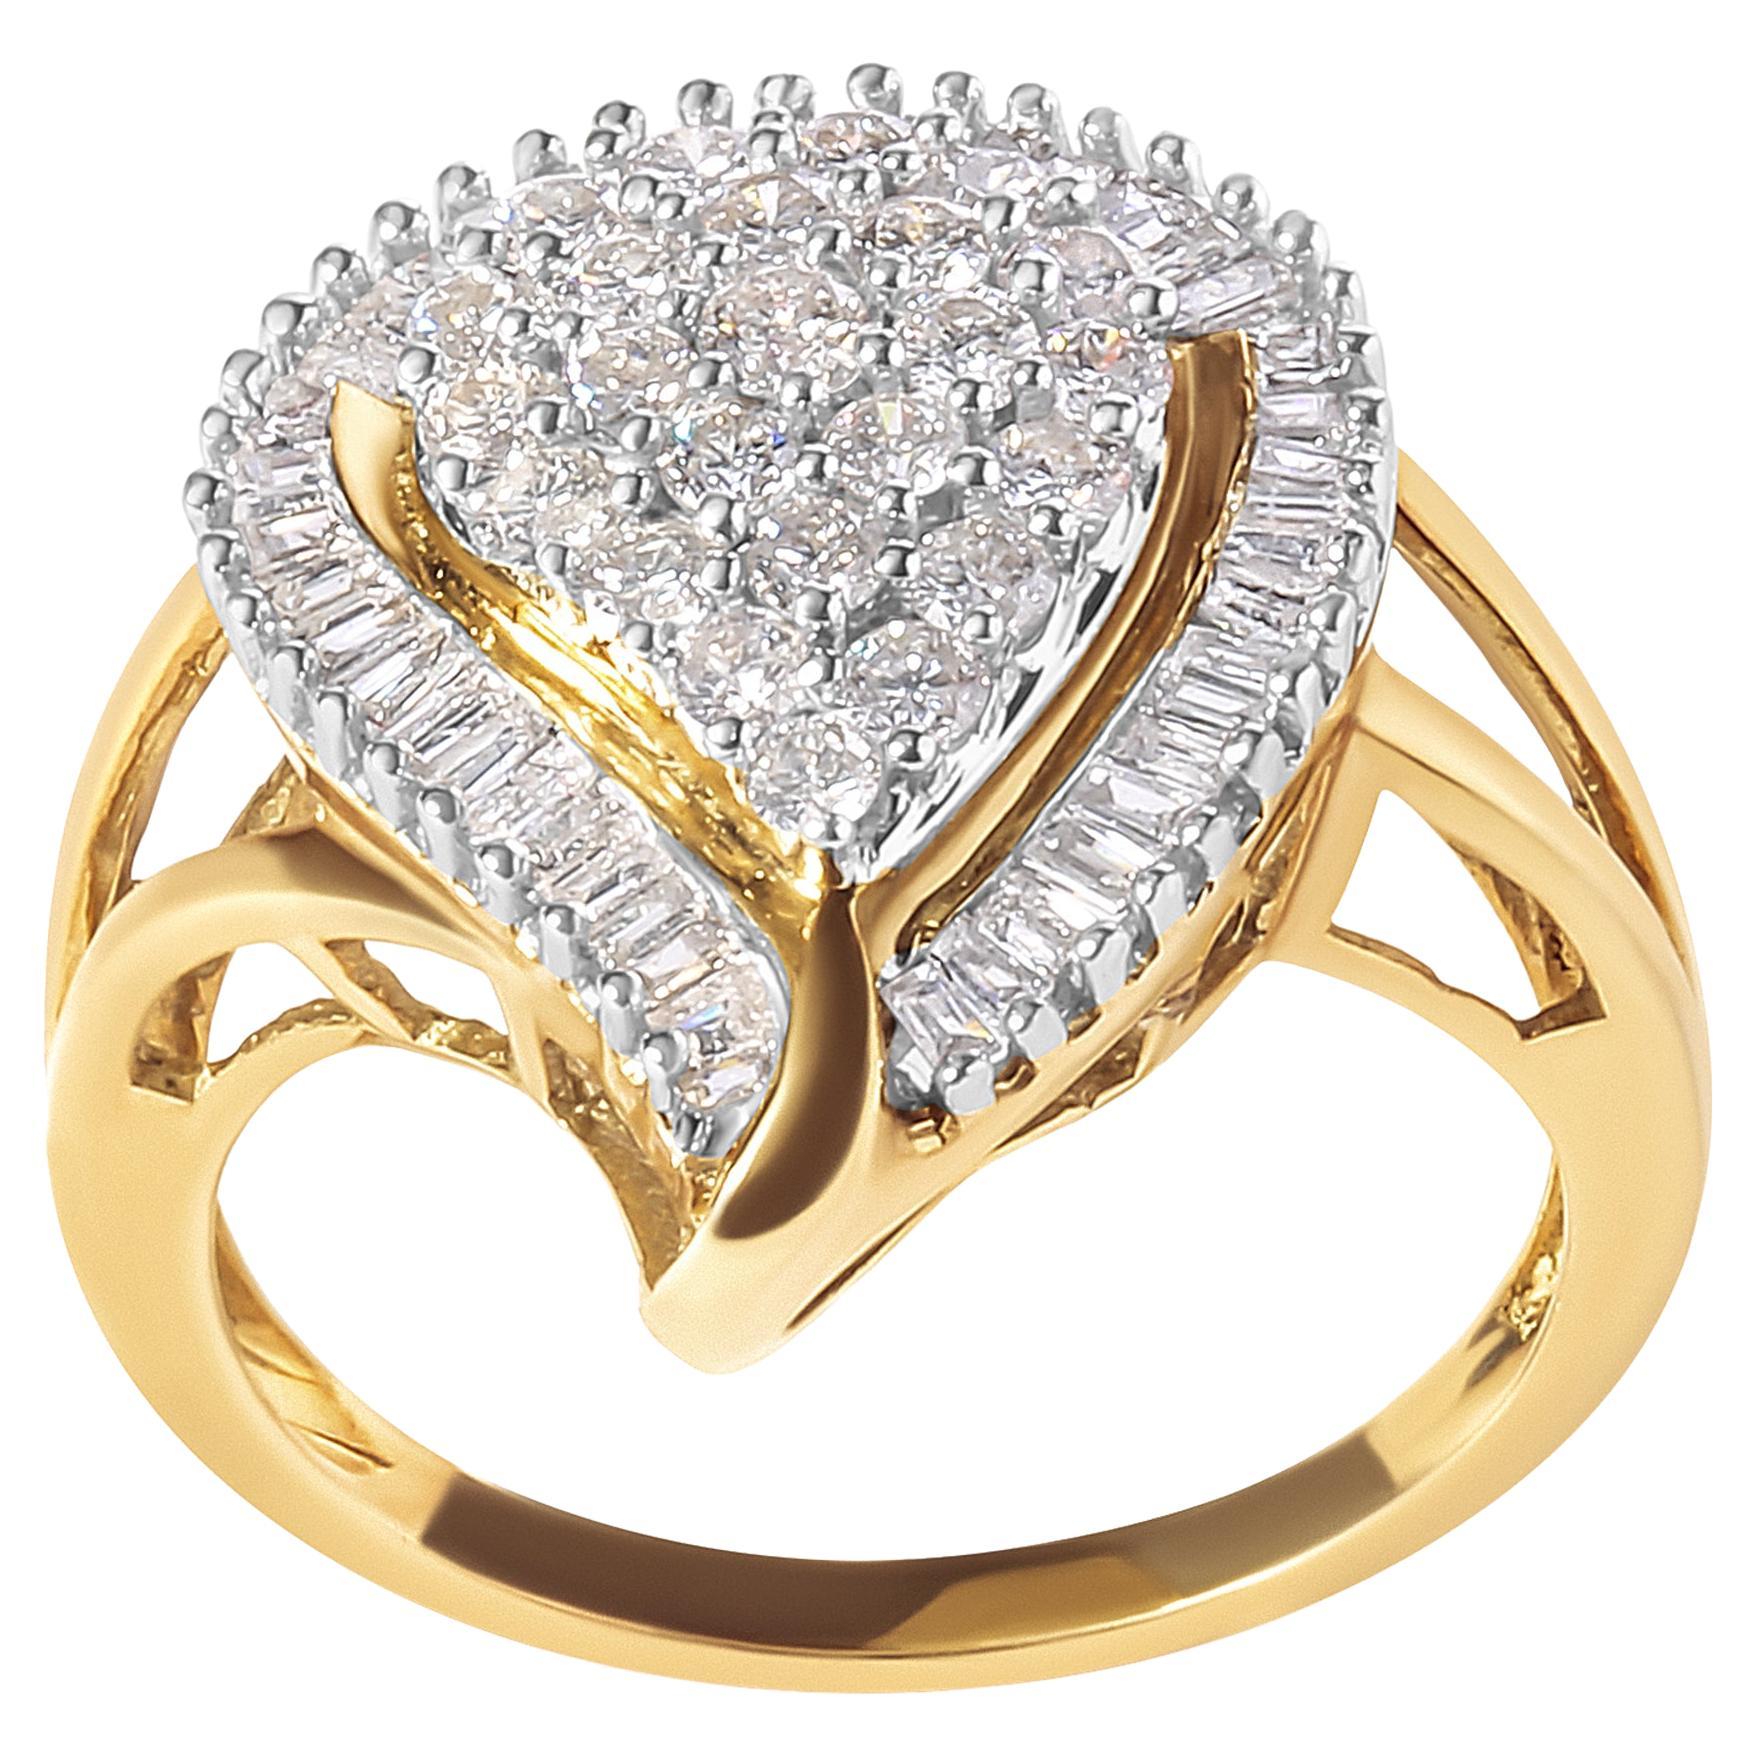 10K Yellow Gold 1.0 Carat Round and Baguette Cut Diamond Ballerina Cluster Ring For Sale